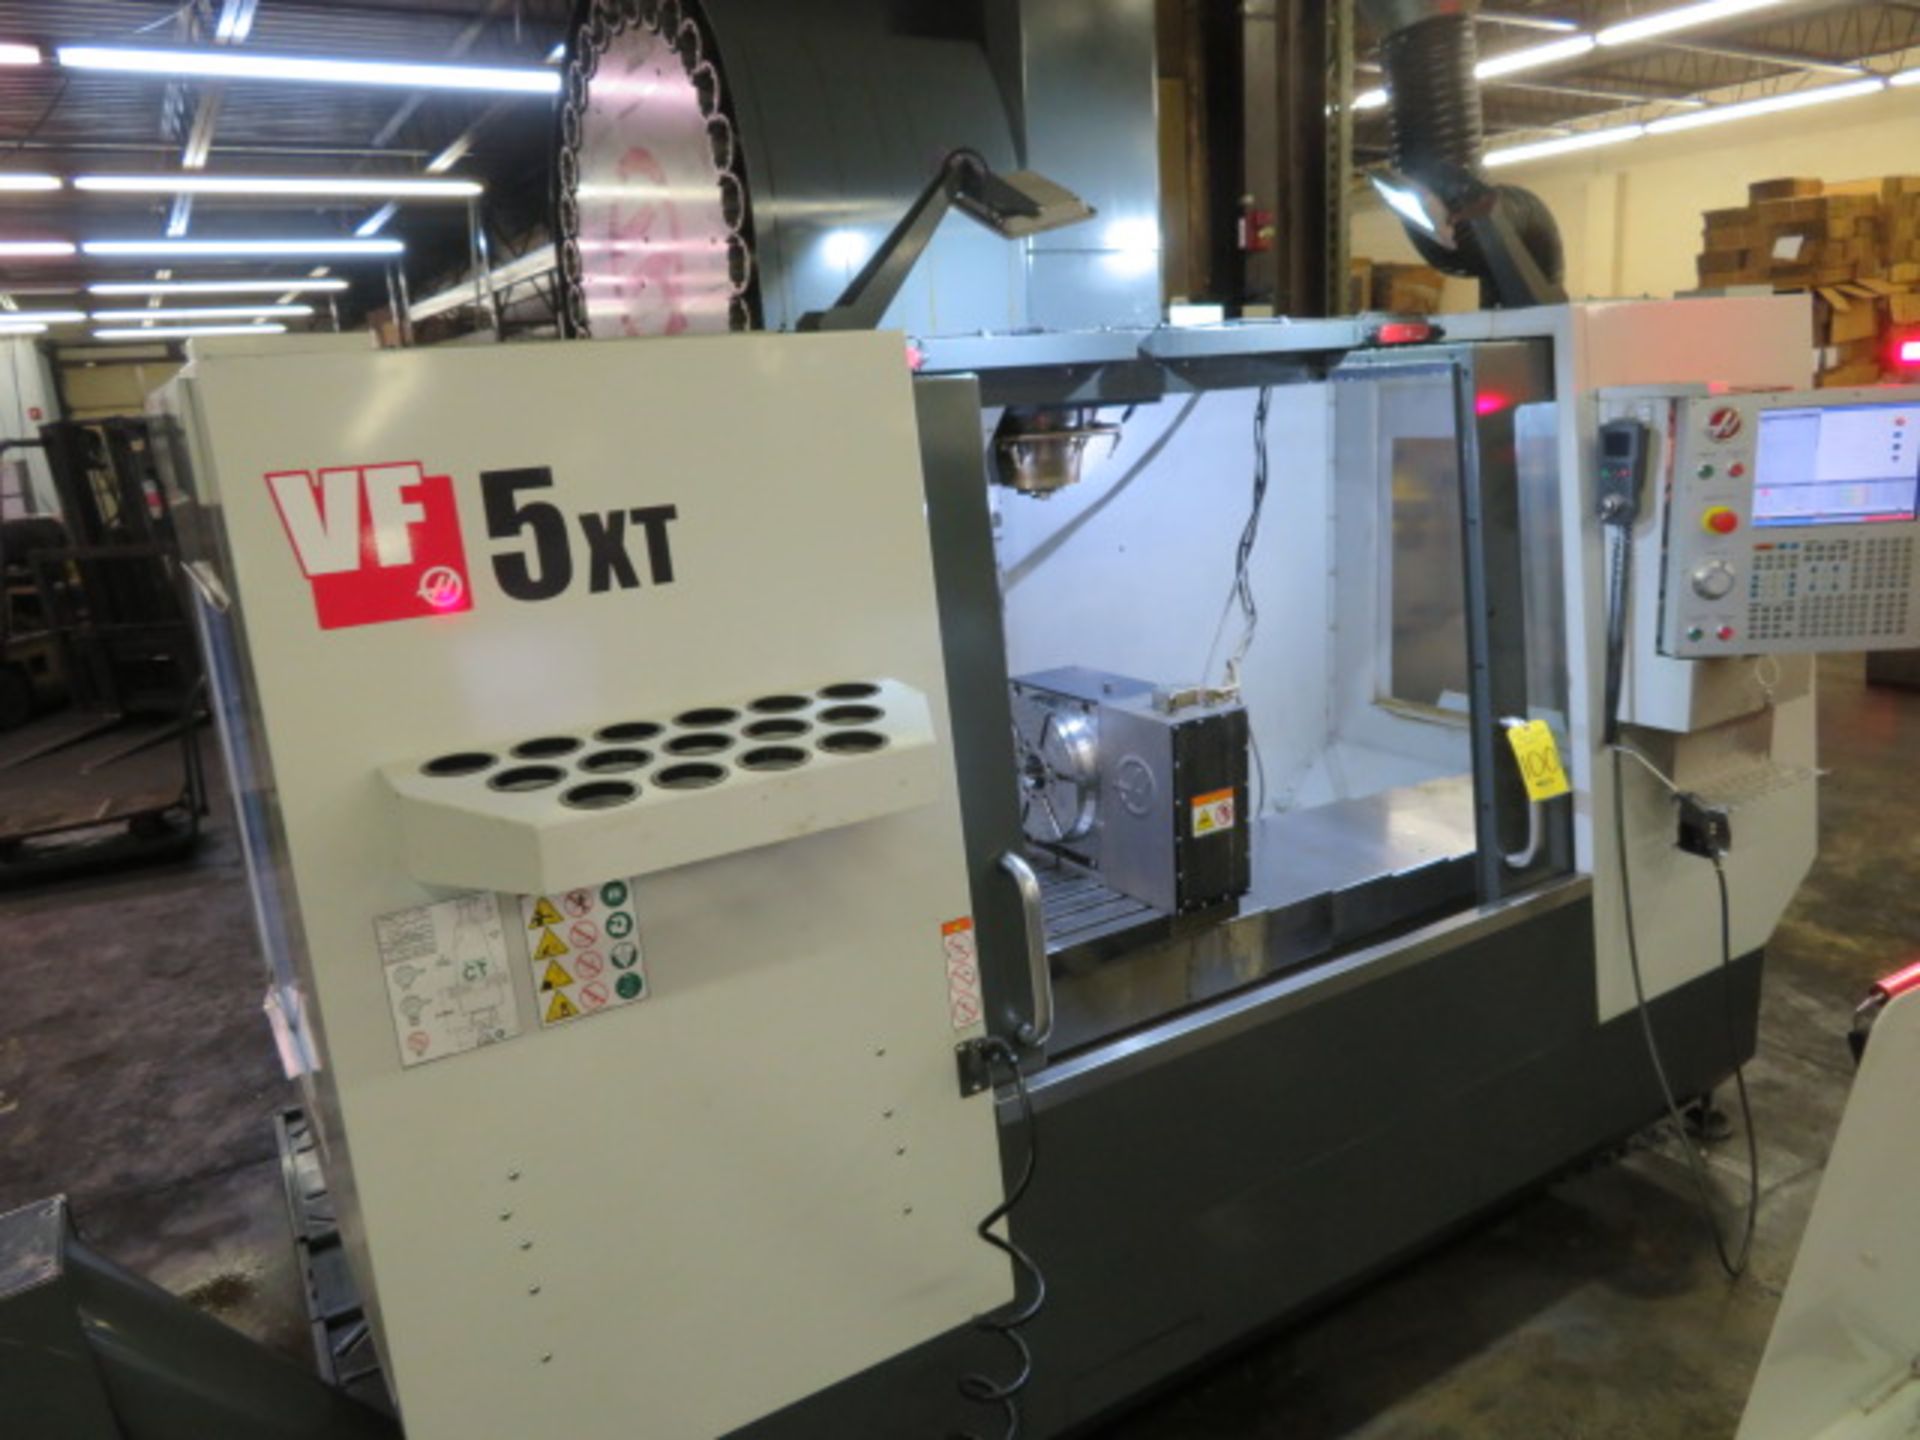 2018 HAAS VF5-50XT CNC Vertical Machining Center, S/N 1151875, HAAS Control, 4TH AXIS ENABLED - Image 7 of 11